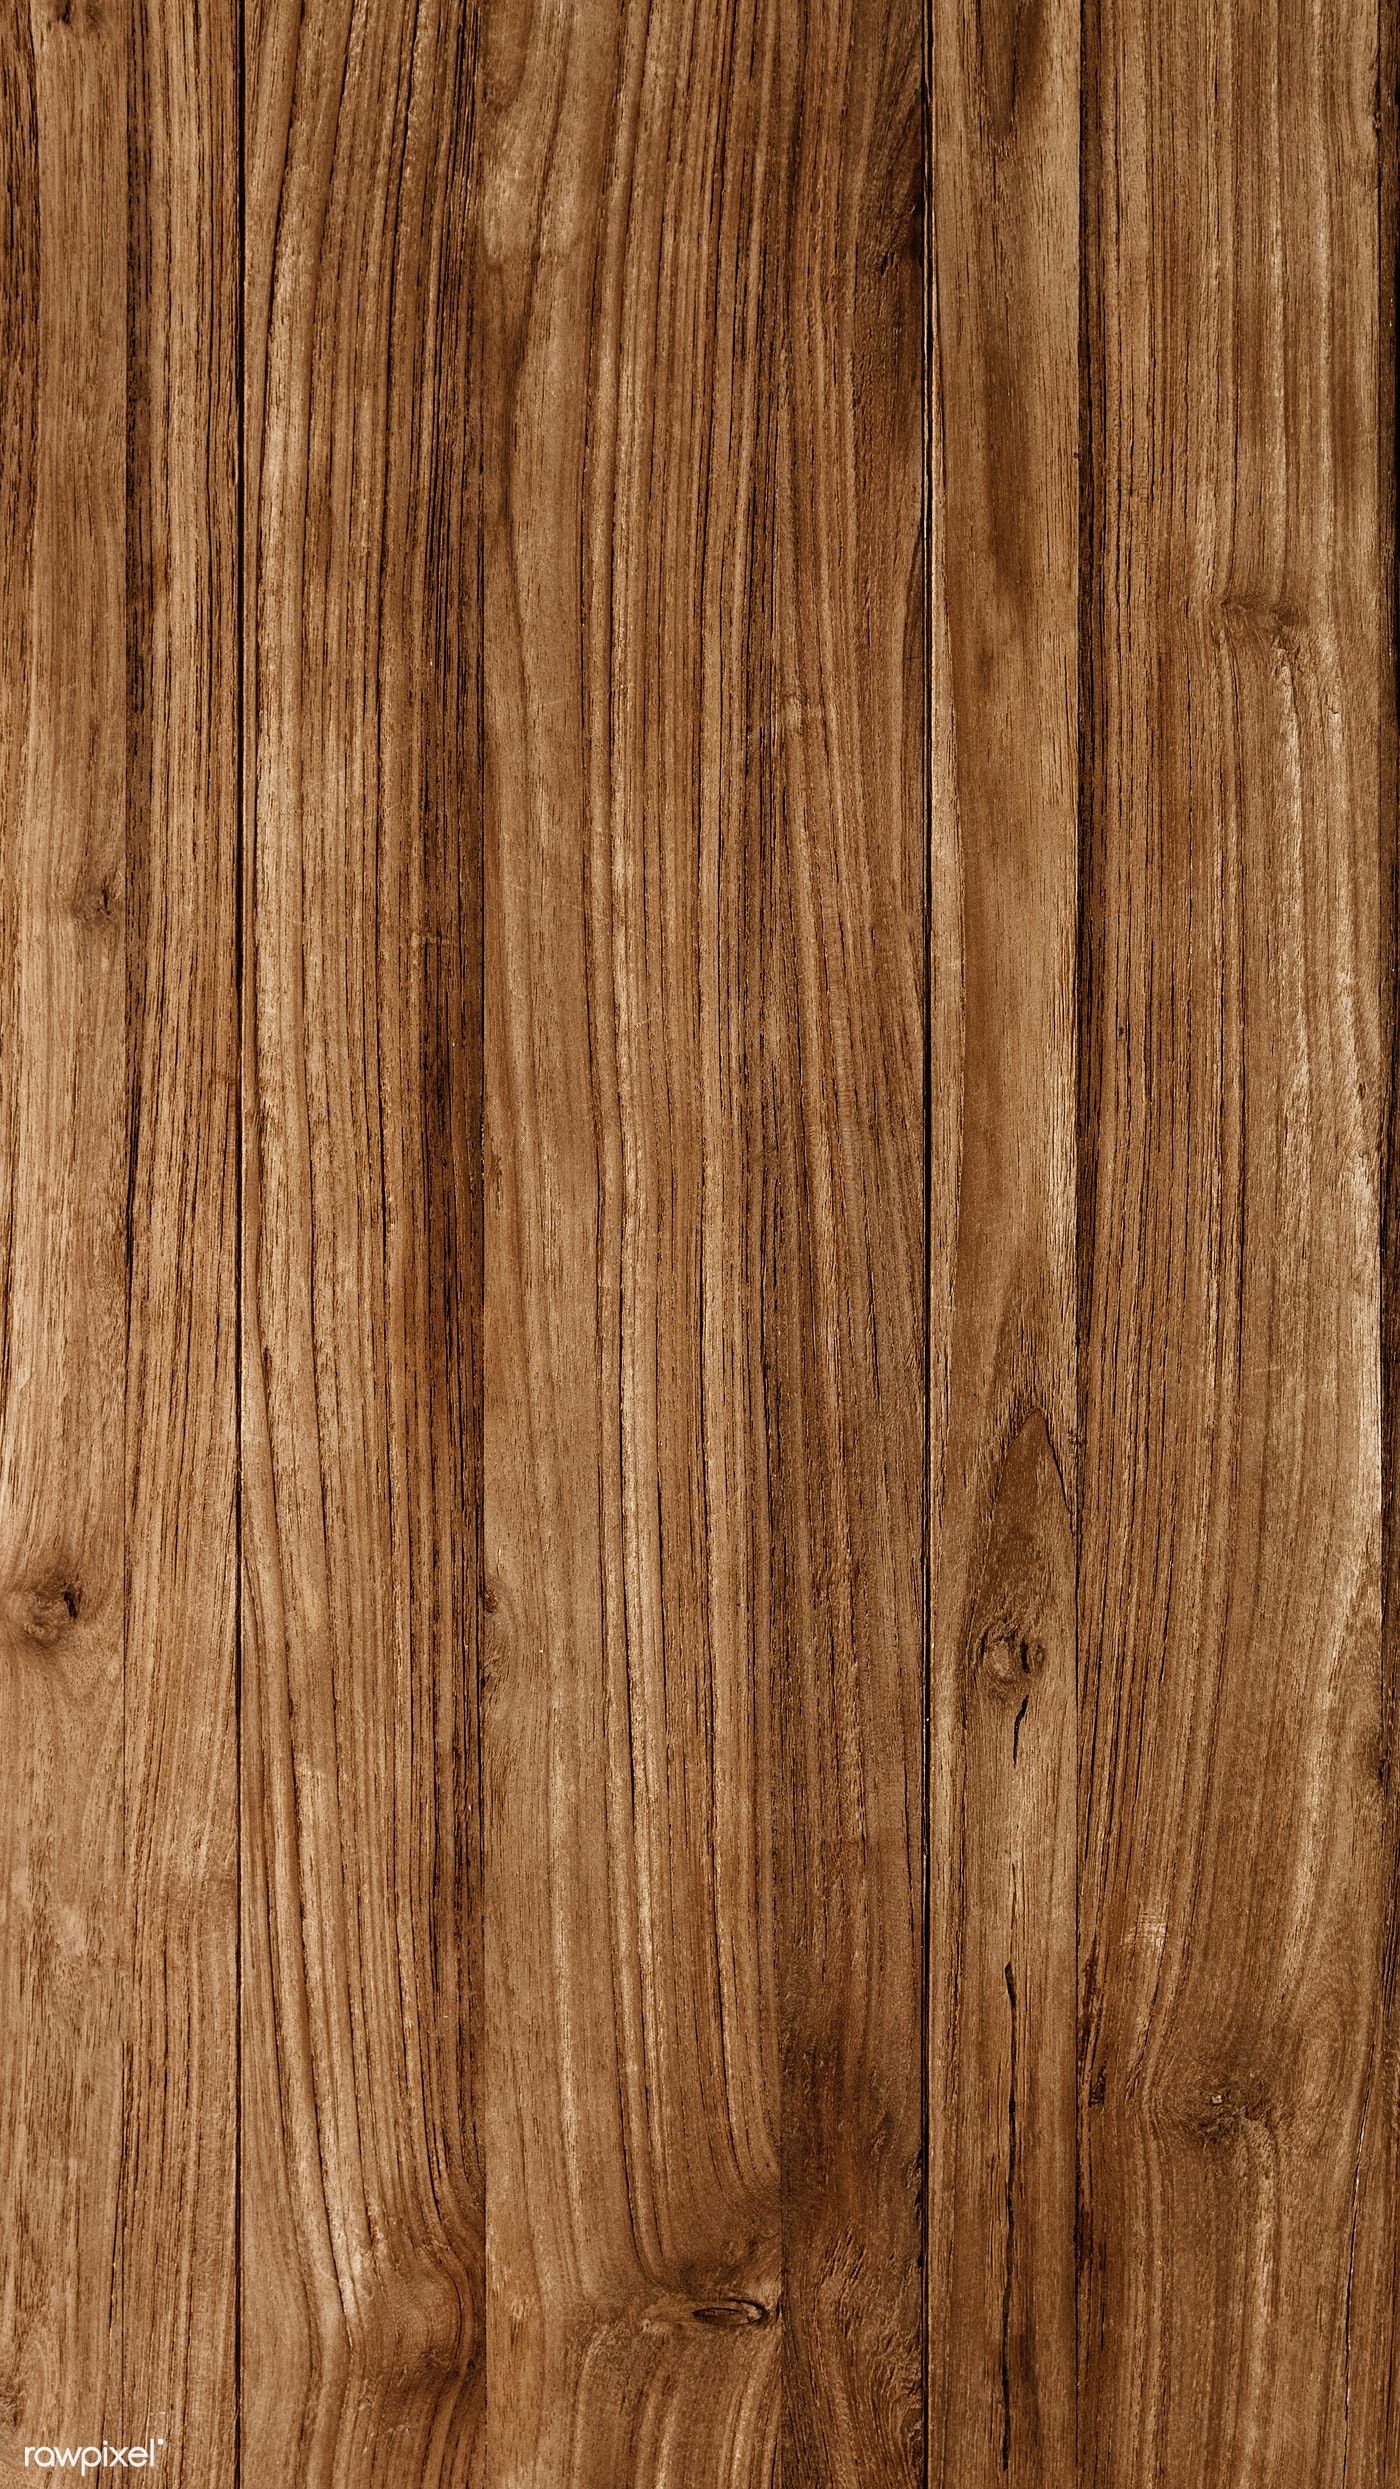 Brown wood textured mobile wallpaper background free image by